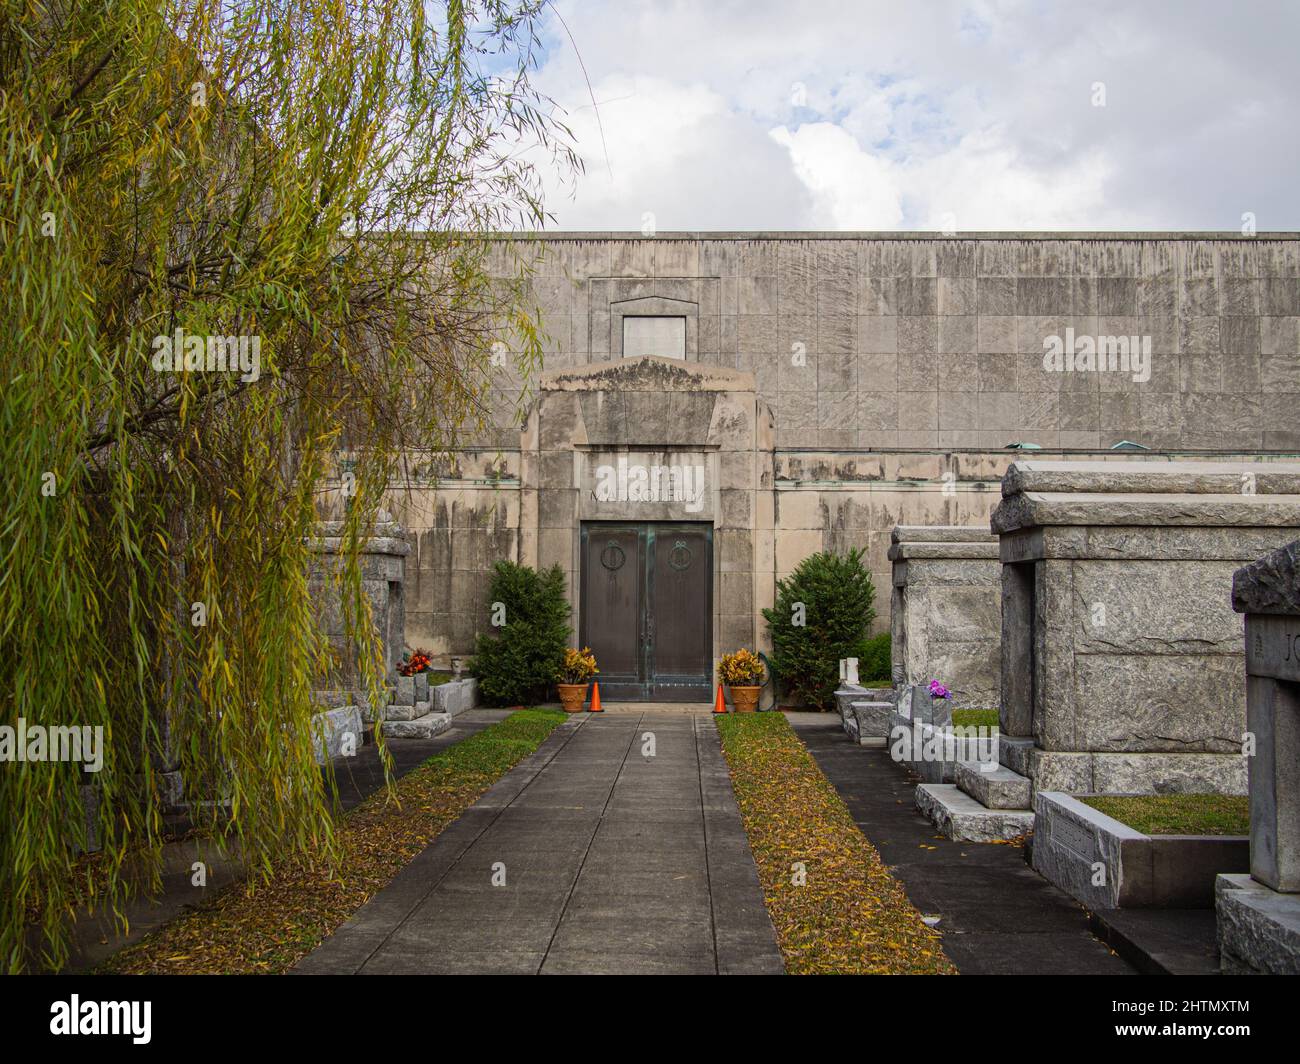 NEW ORLEANS, LA - DECEMBER 21, 2013: Hope Mausoleum on Canal Street Stock Photo